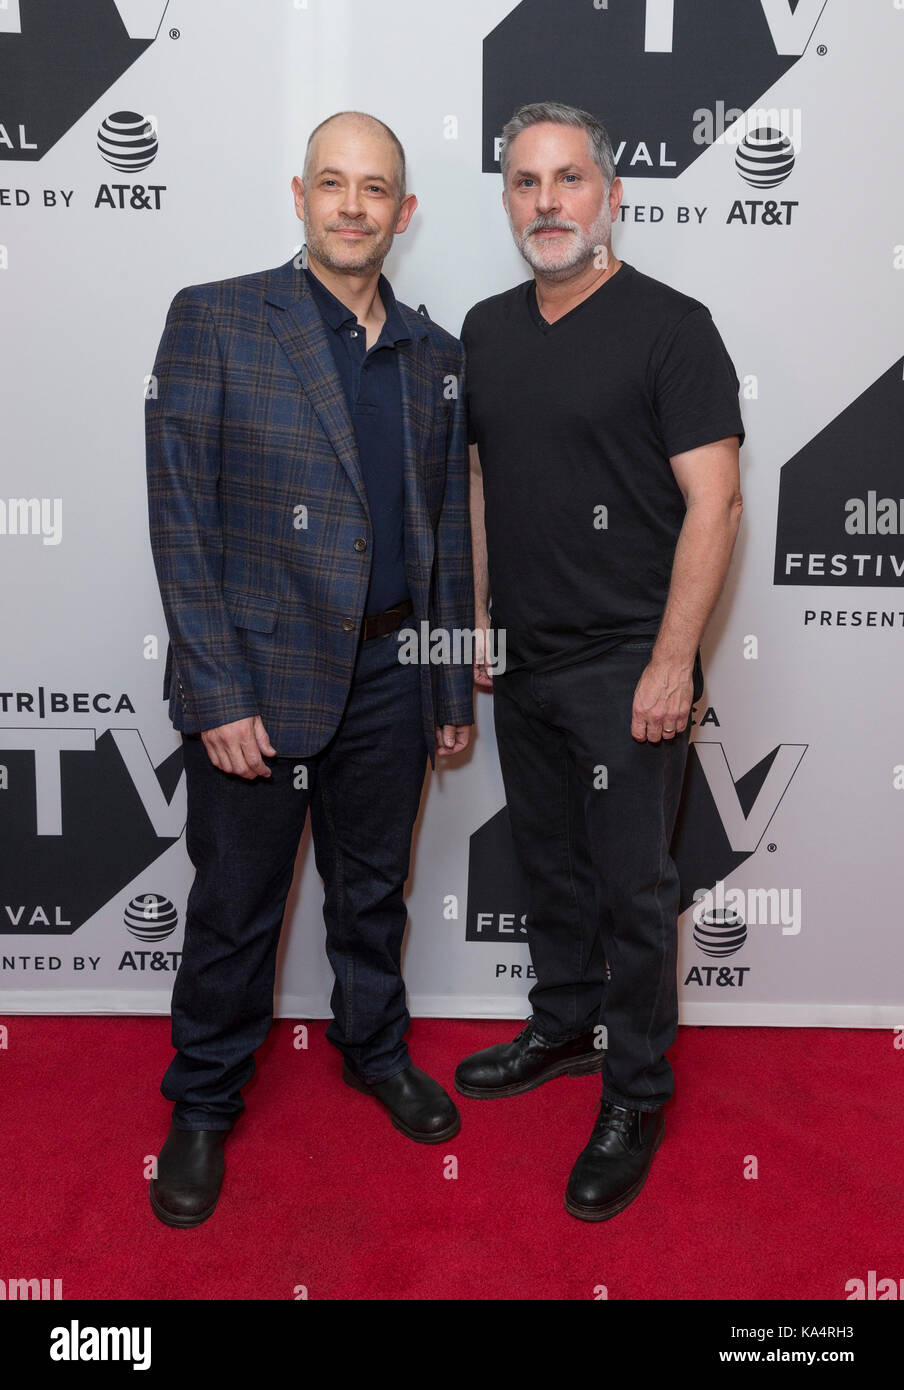 New York, United States. 24th Sep, 2017. Joe Gangemi & Gregory Jacobs attend Red Oaks season 3 premiere during Tribeca TV festival at Cinepolis Chelsea Credit: Lev Radin/Pacific Press/Alamy Live News Stock Photo